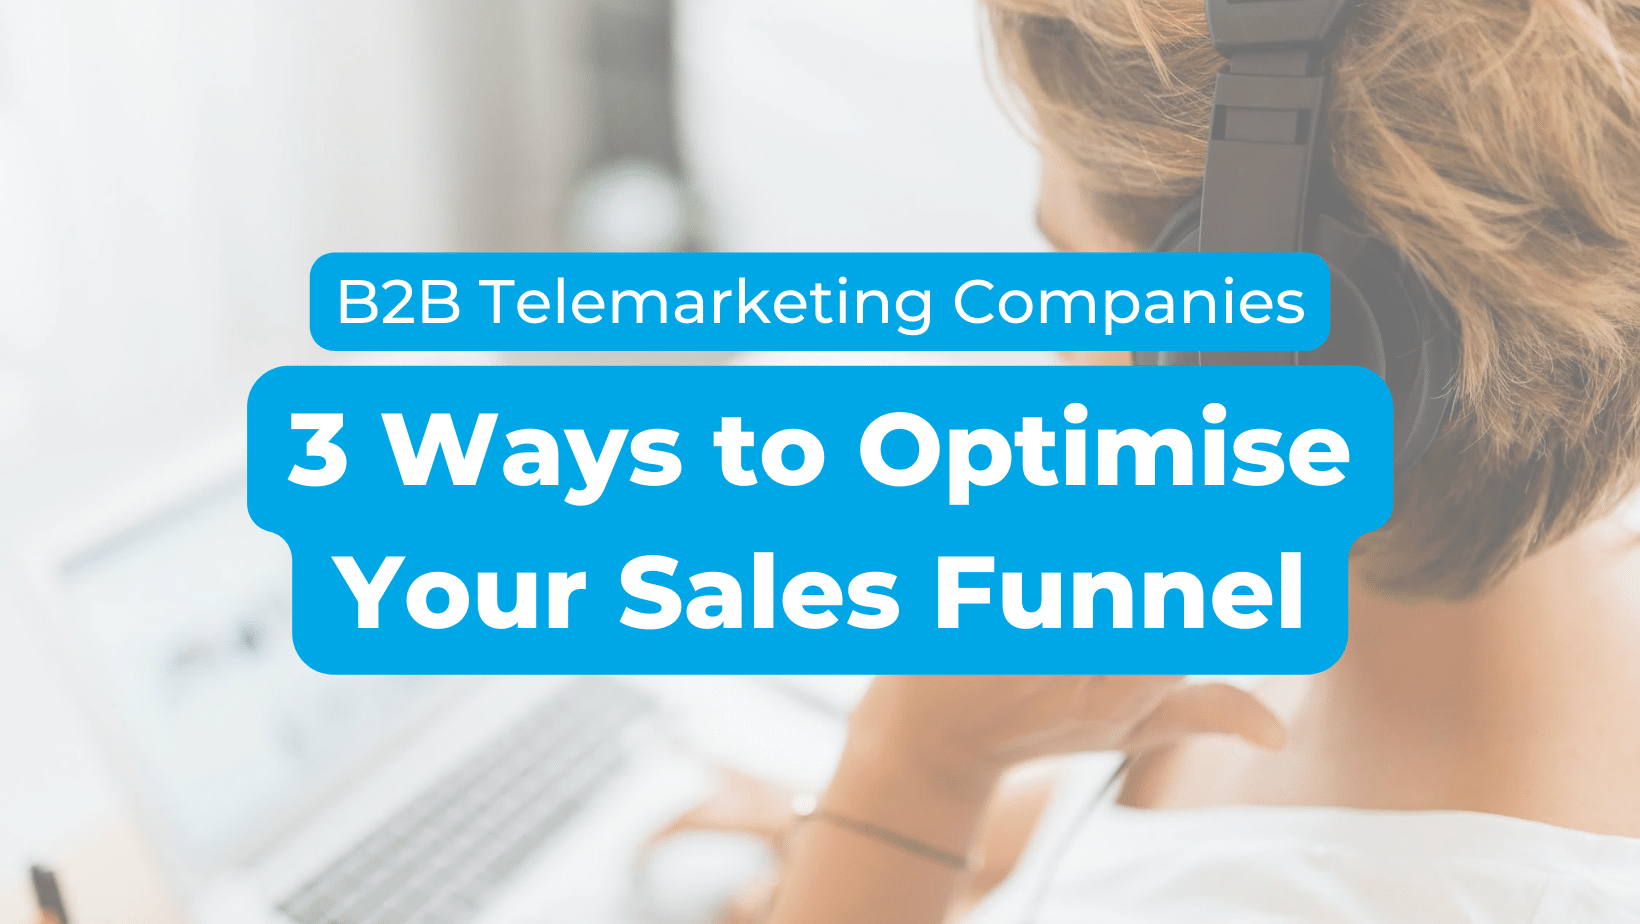 B2B Telemarketing Companies: 3 Ways to Optimise Your Sales Funnel